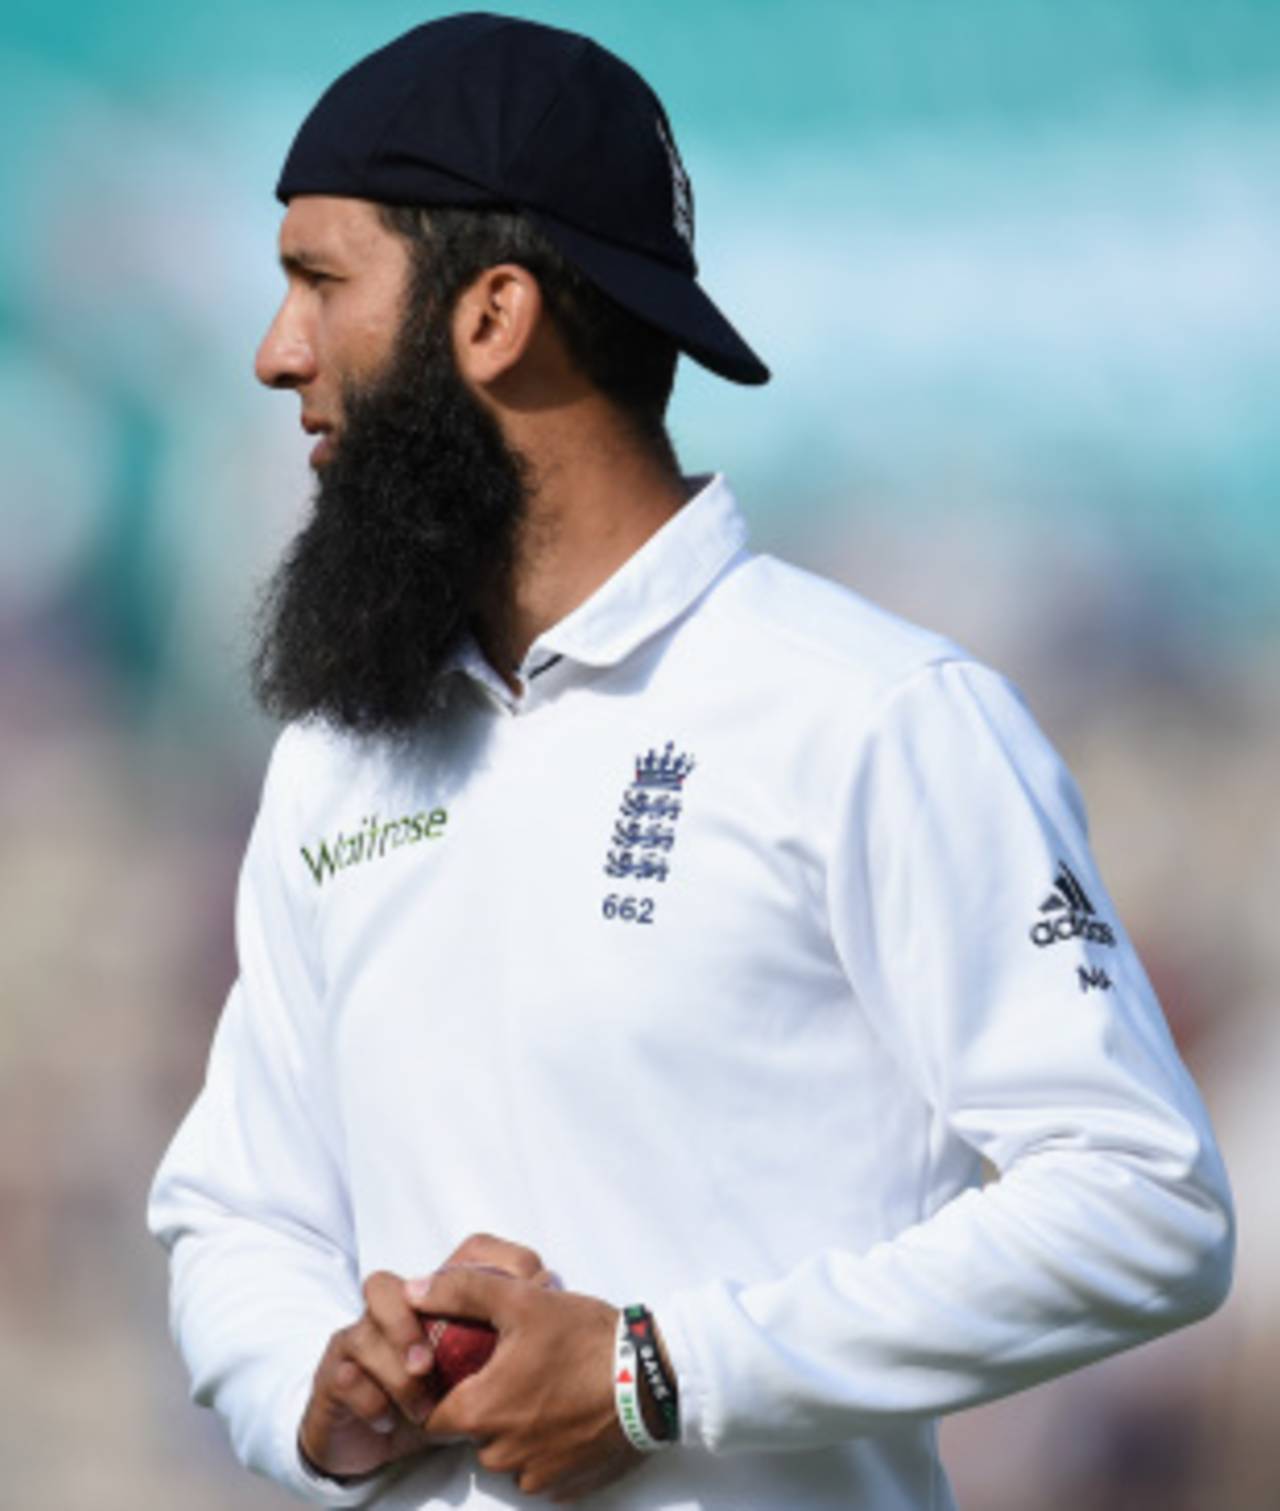 Moeen Ali wasn't just proclaiming his beliefs, he was making a statement about the most controversial and problematic battleground of our time&nbsp;&nbsp;&bull;&nbsp;&nbsp;Getty Images